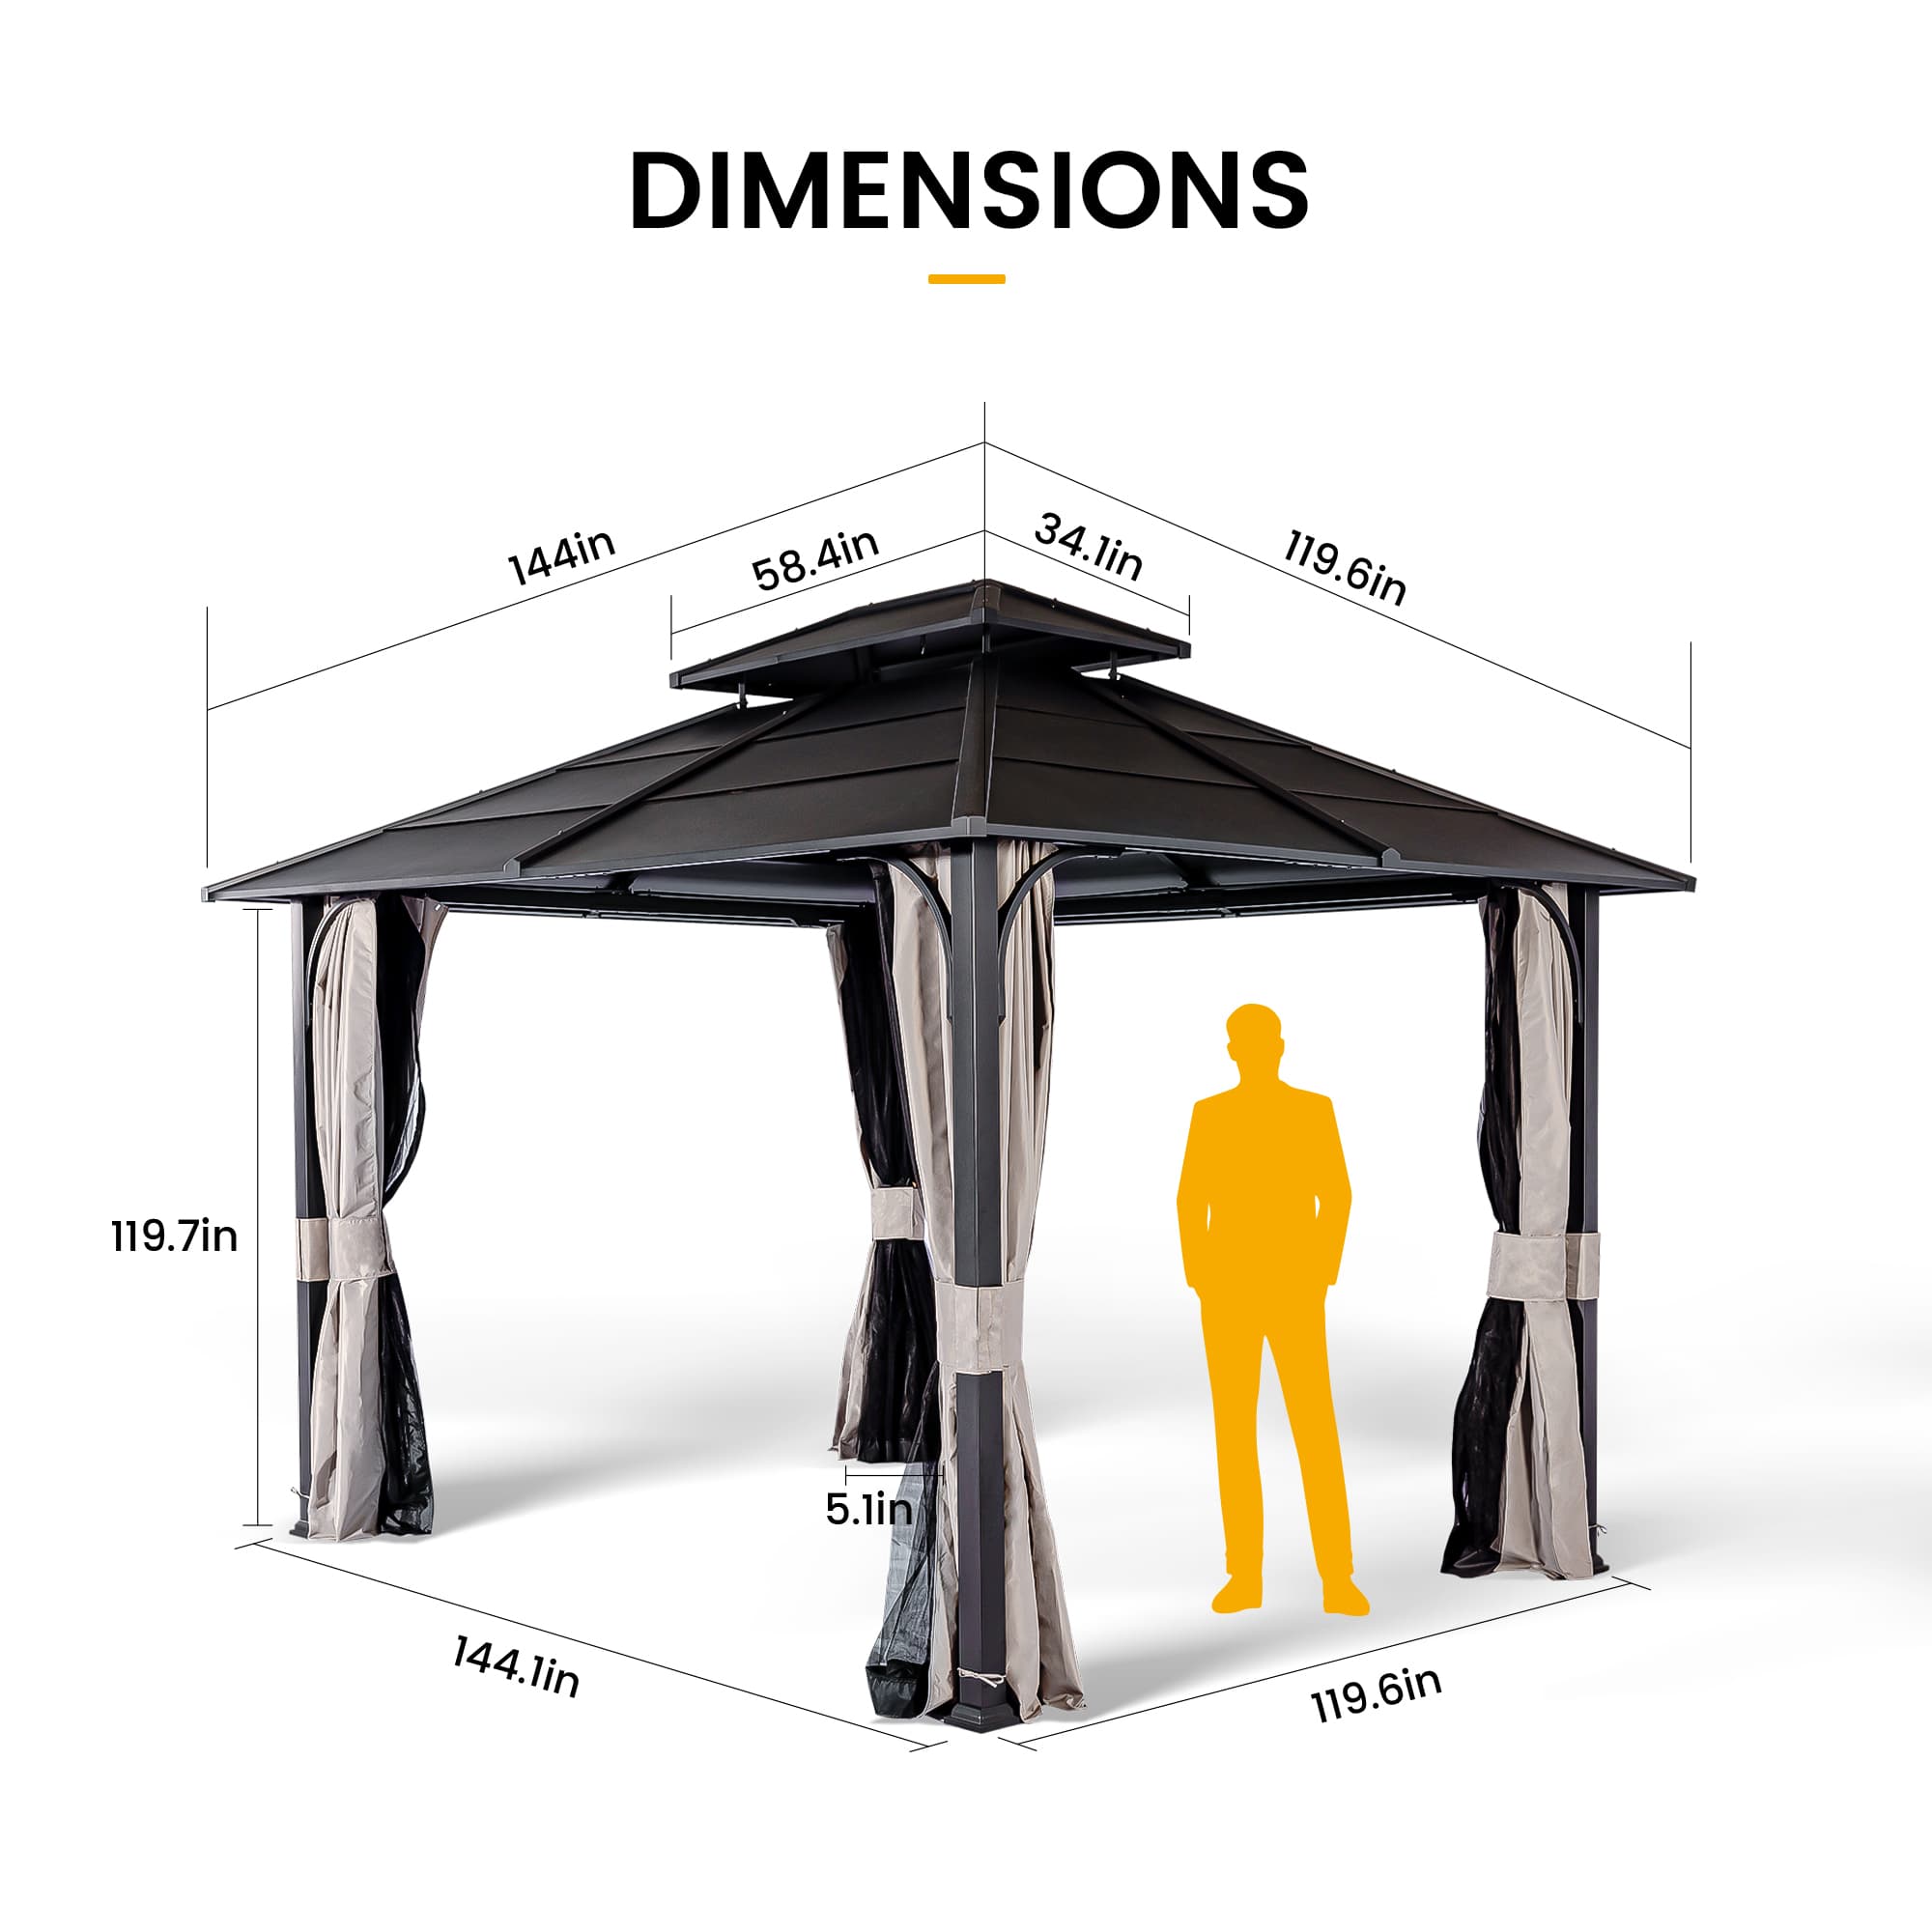 Olilawn 10' x 12' Andes Hardtop Gazebo with 2-Tier Ventilated Roof,Curtain & Netting